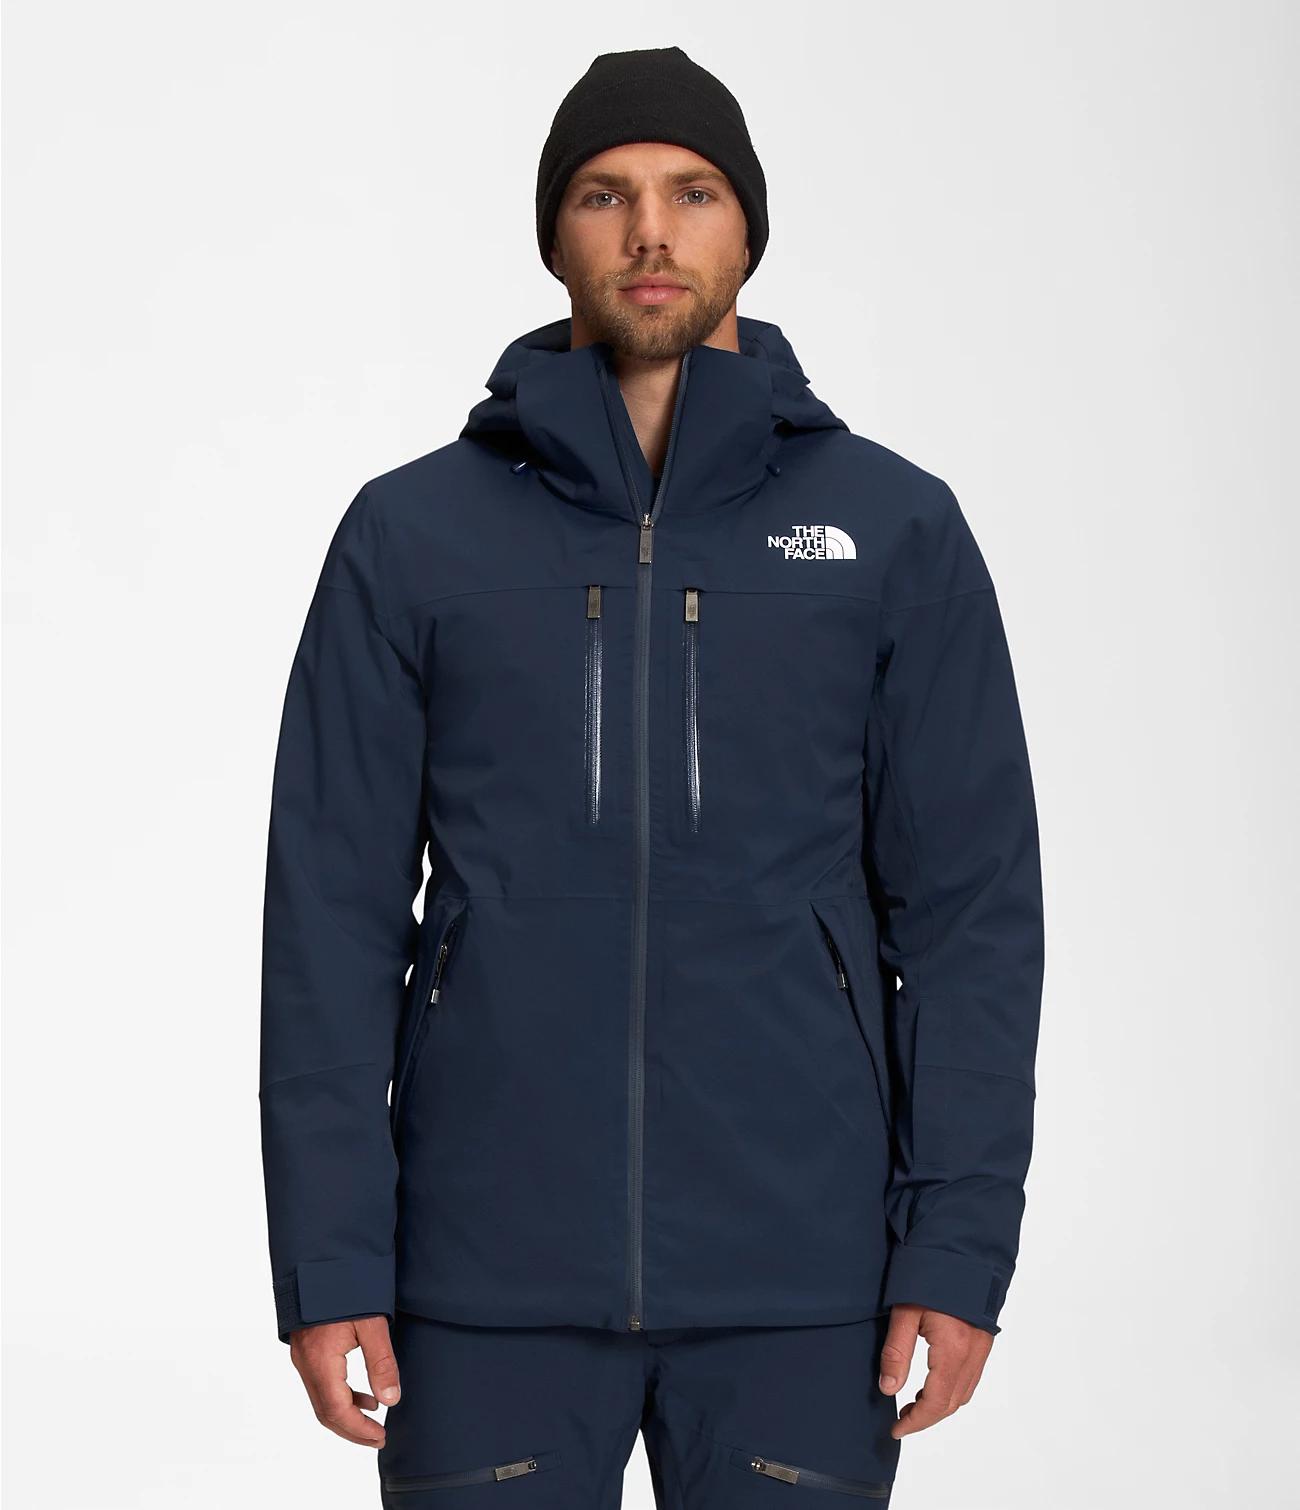 Men’s New Outerboroughs Jacket by THE NORTH FACE | jellibeans